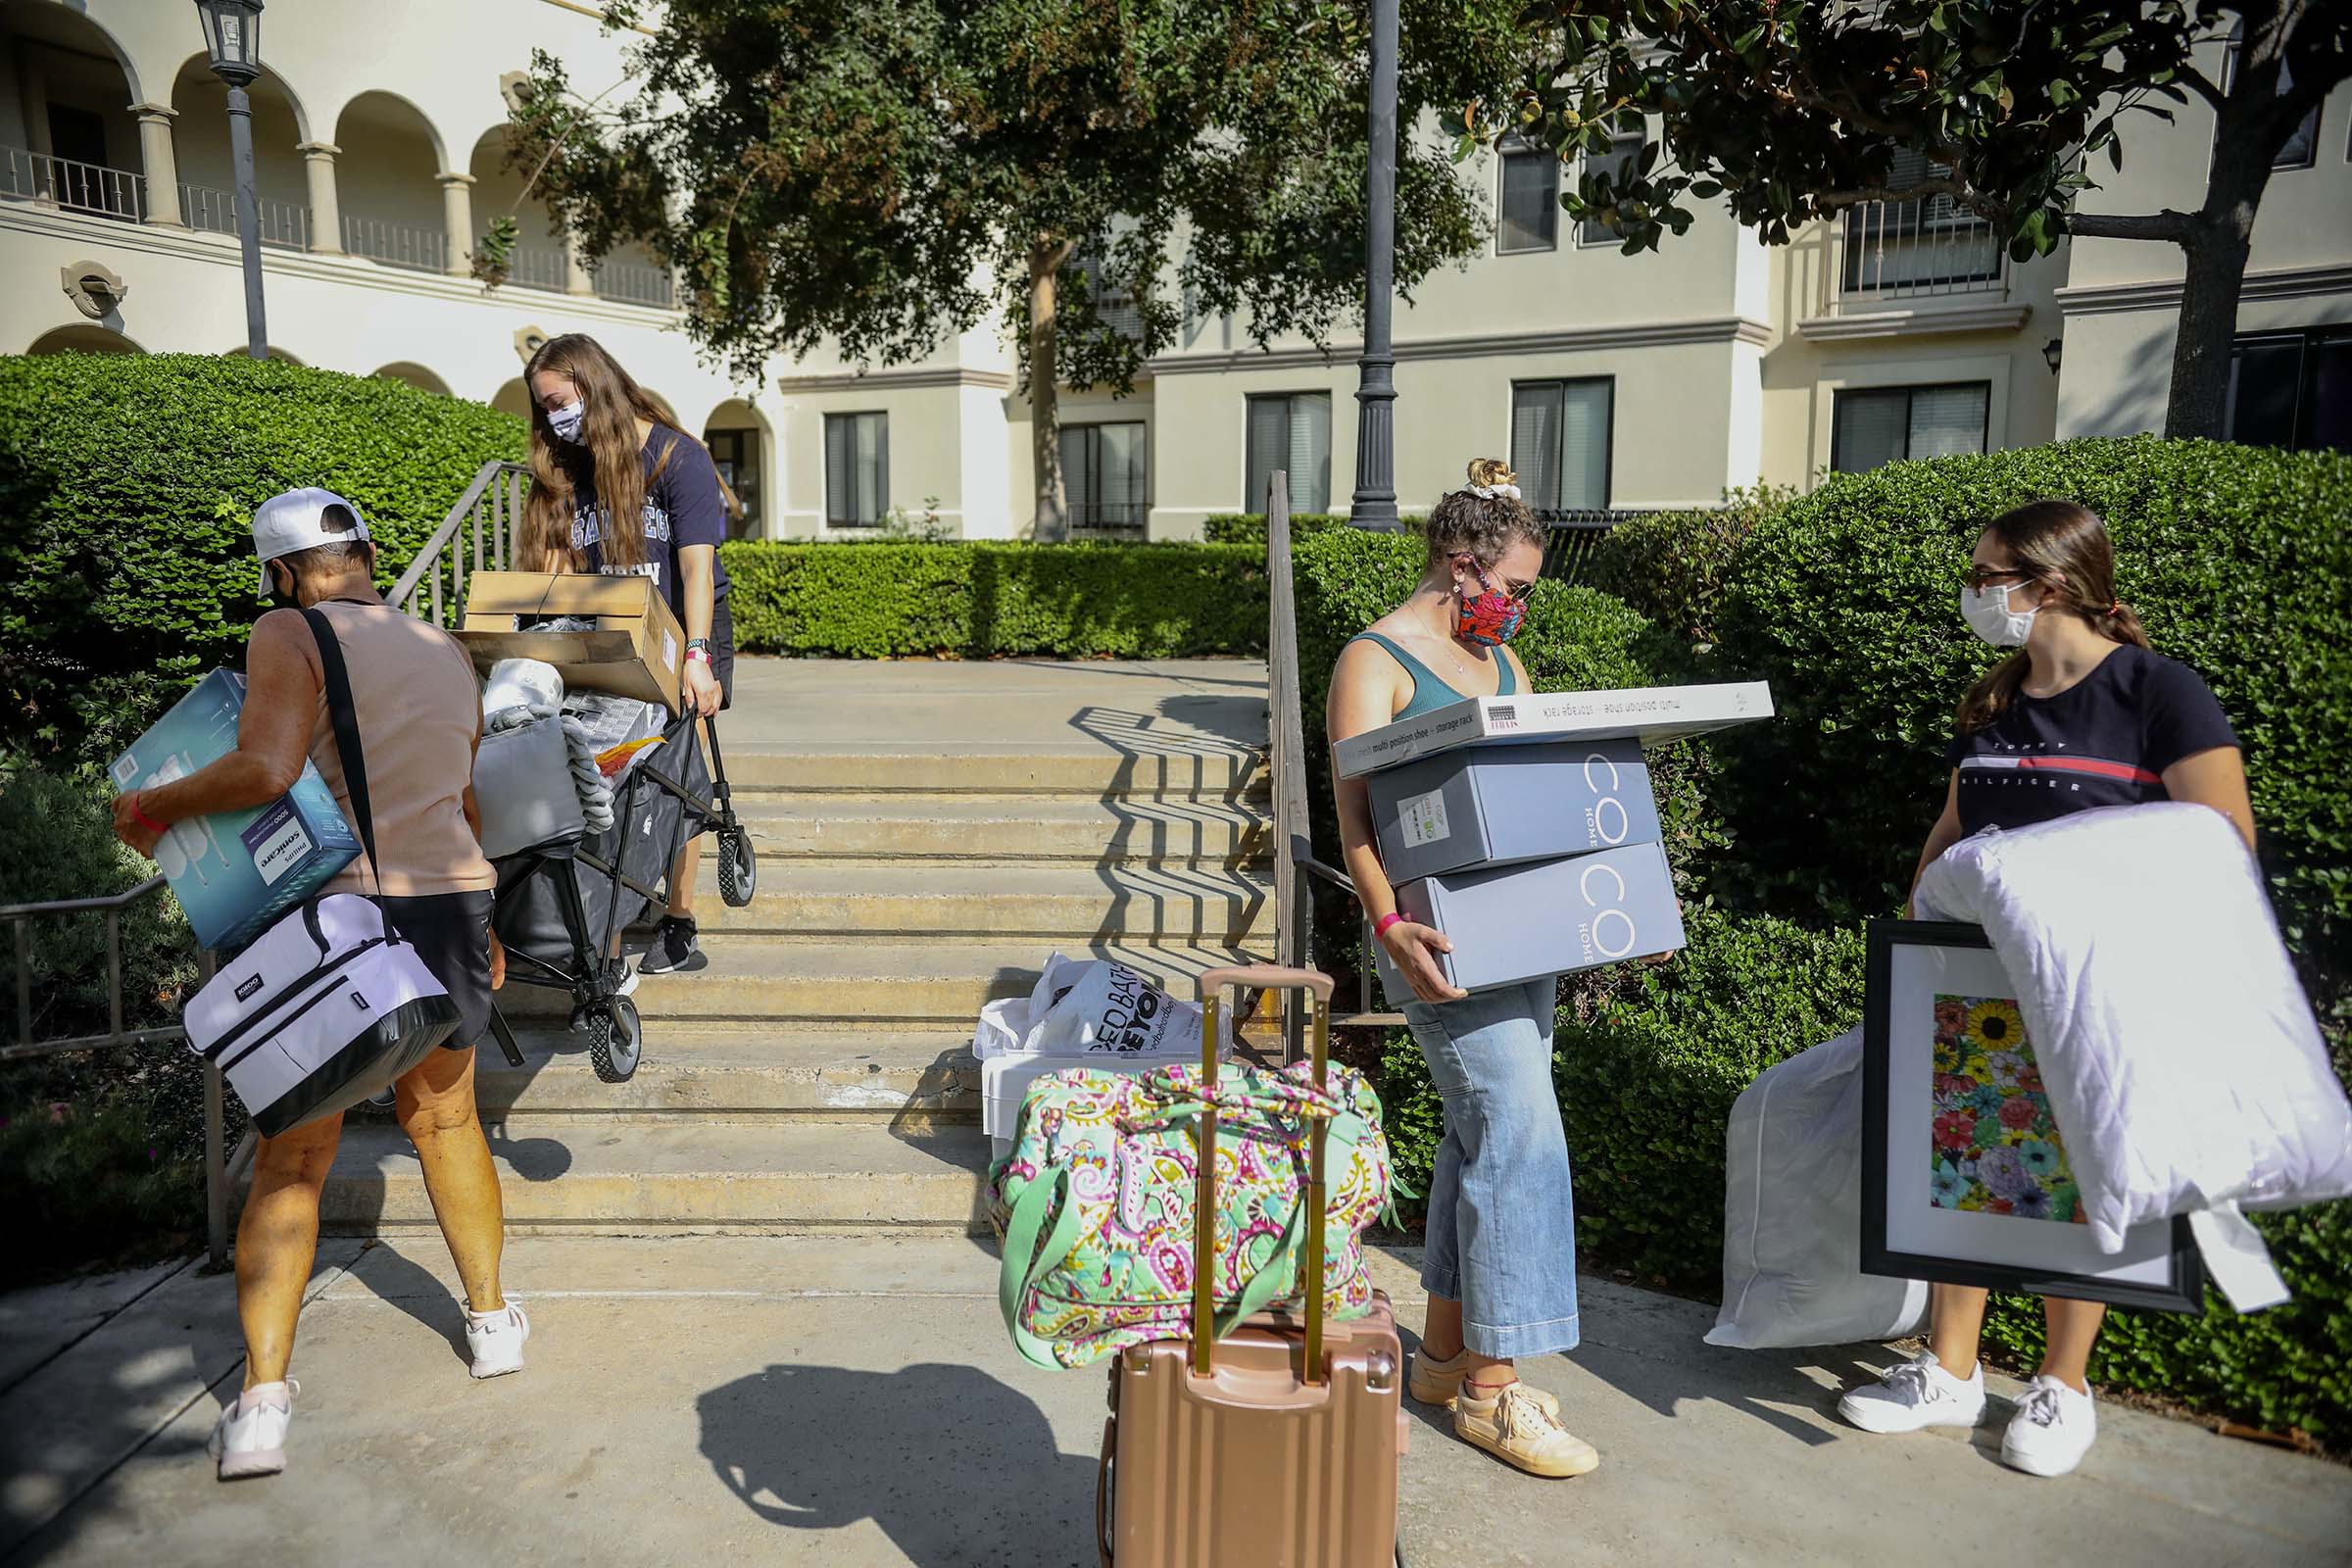 Students move-into their dorm rooms at University of California San Diego on Sep. 18, 2020. (Sandy Huffaker—Redux)